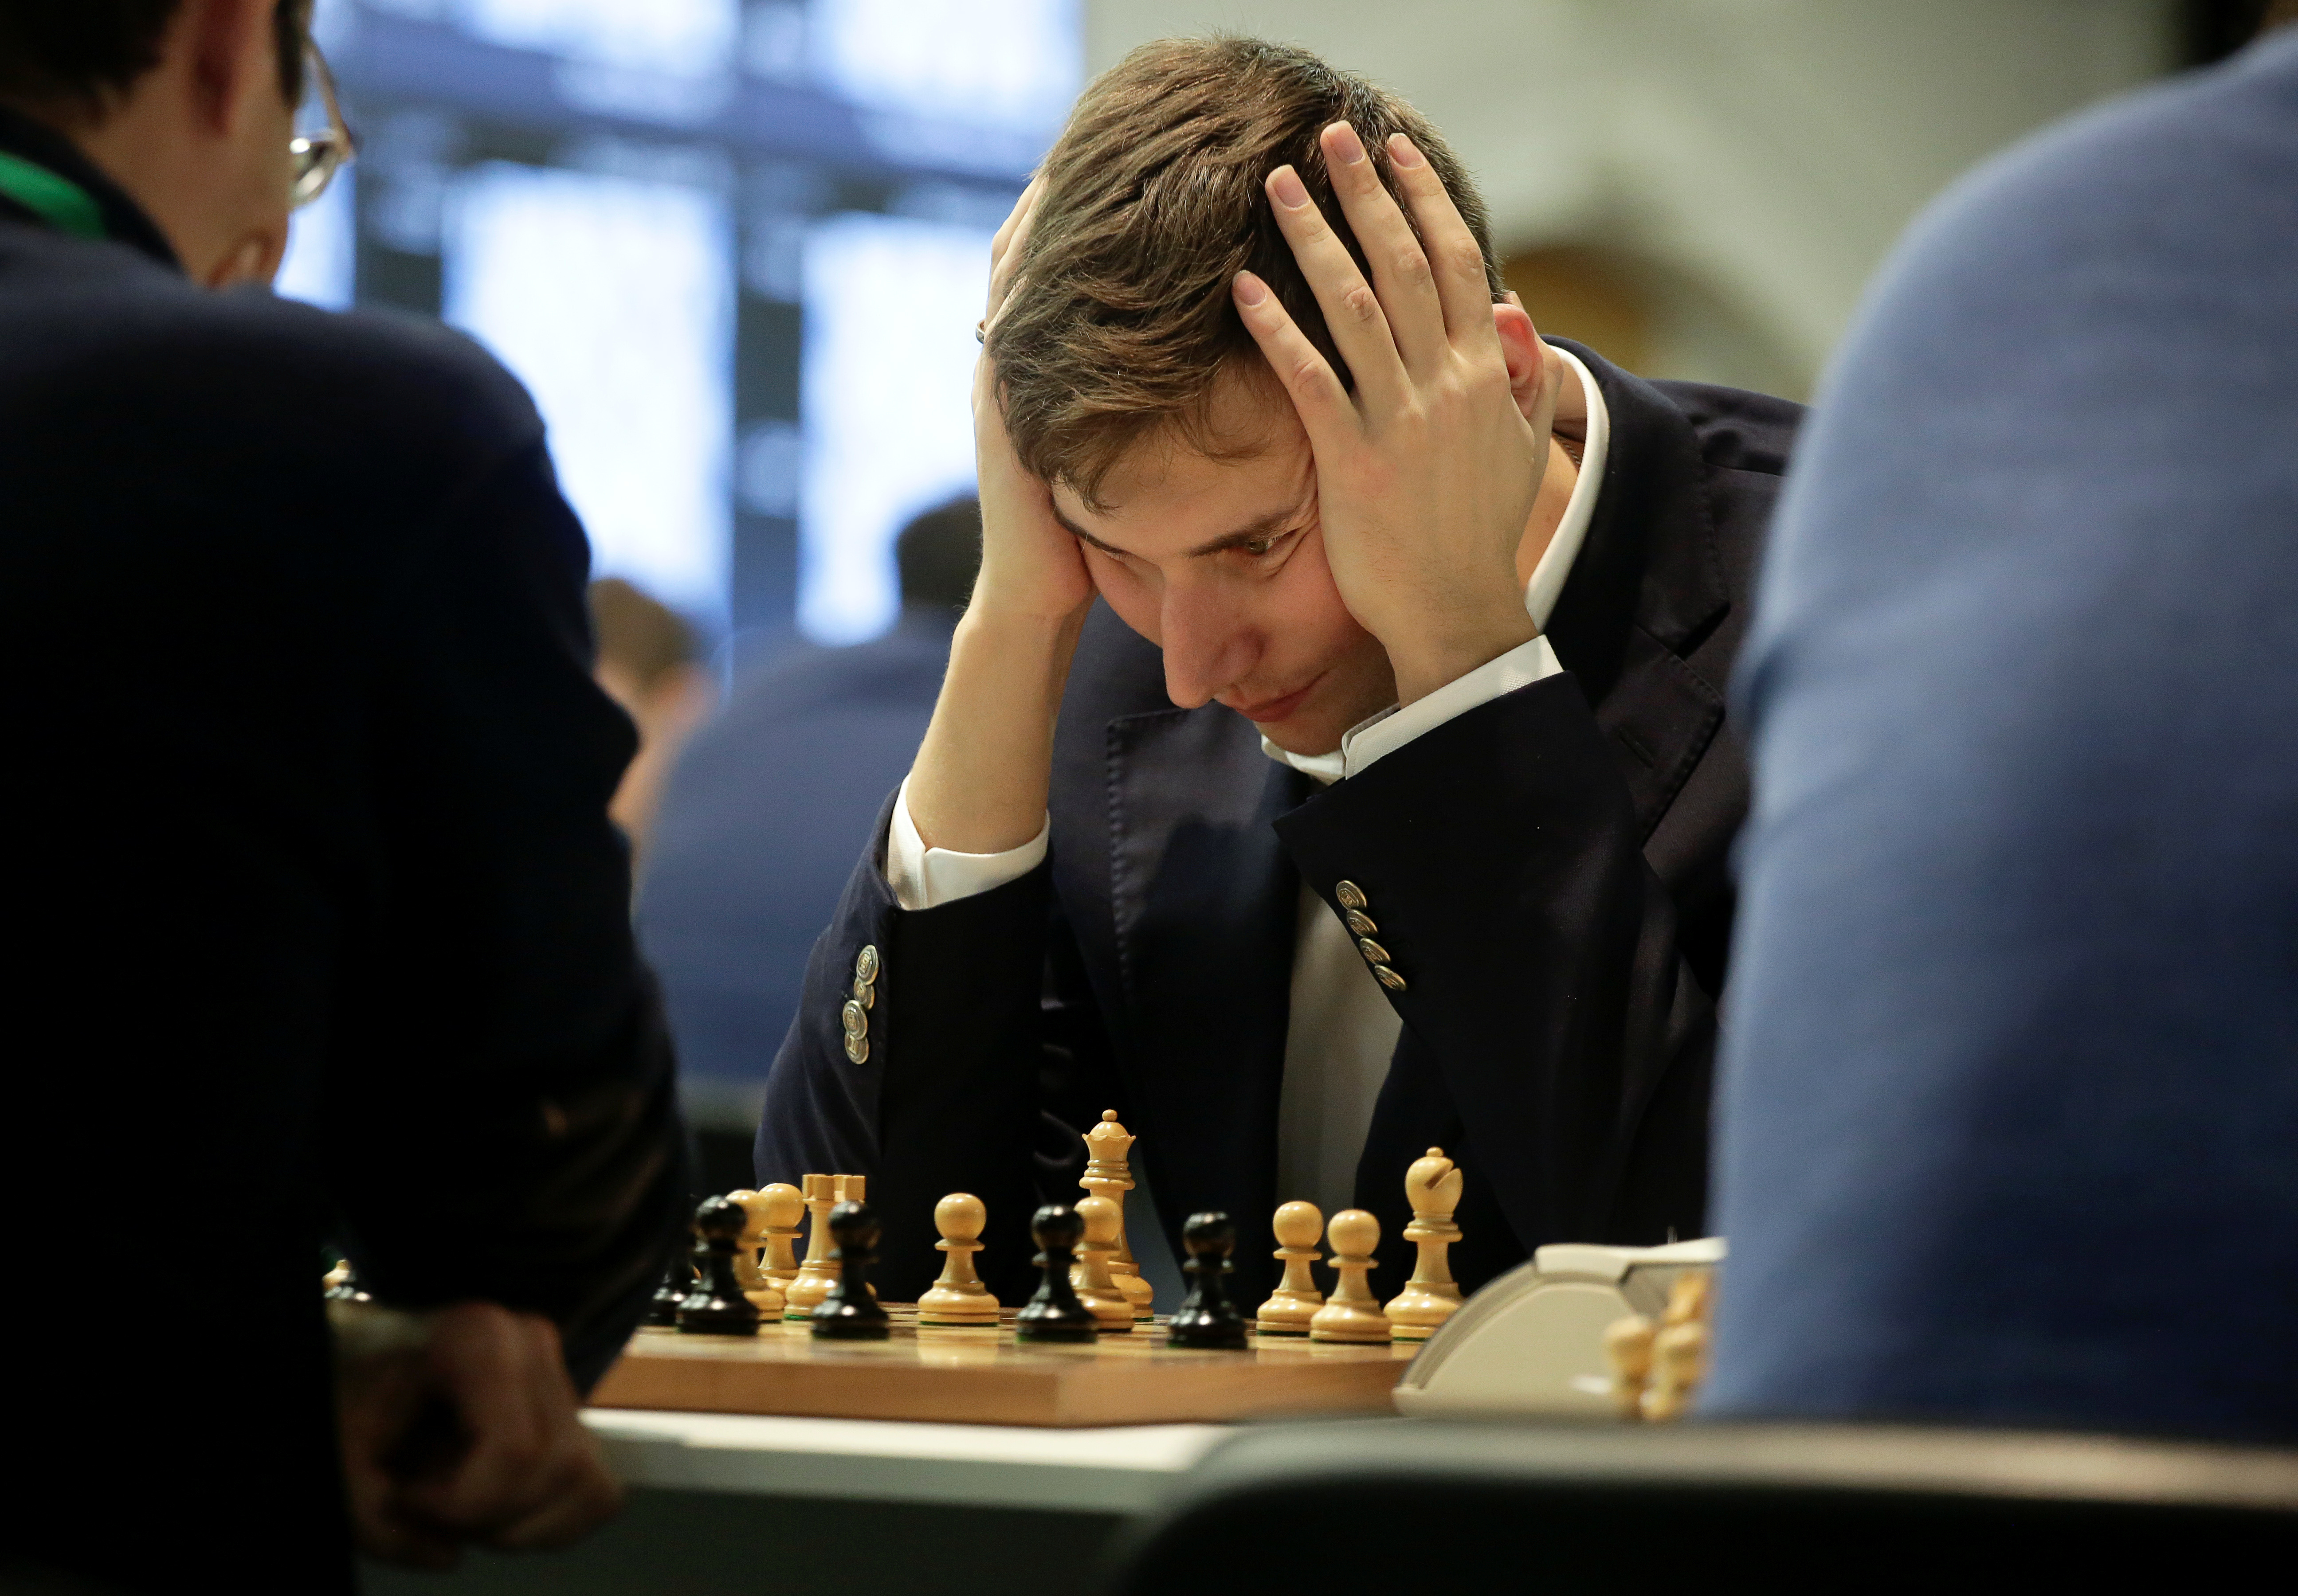 Interesting views from professional players on fast chess. : r/chess